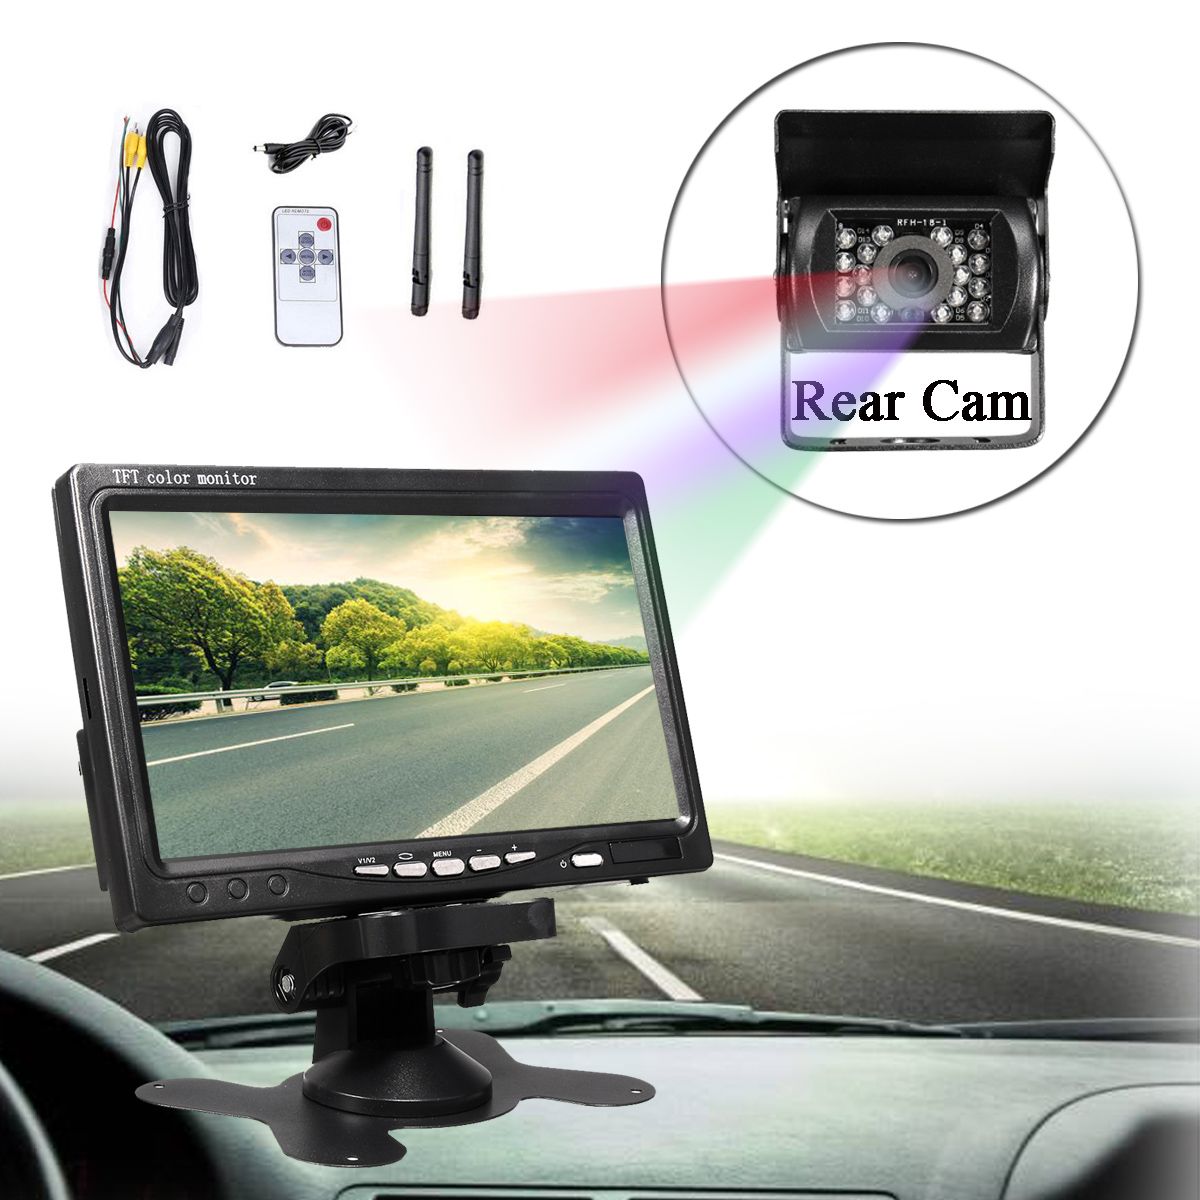 Wireless-7-Inch-LCD-Monitor-Car-Bus-Waterproof-Infrered-Rear-View-Backup-Camera-Cam-1206869